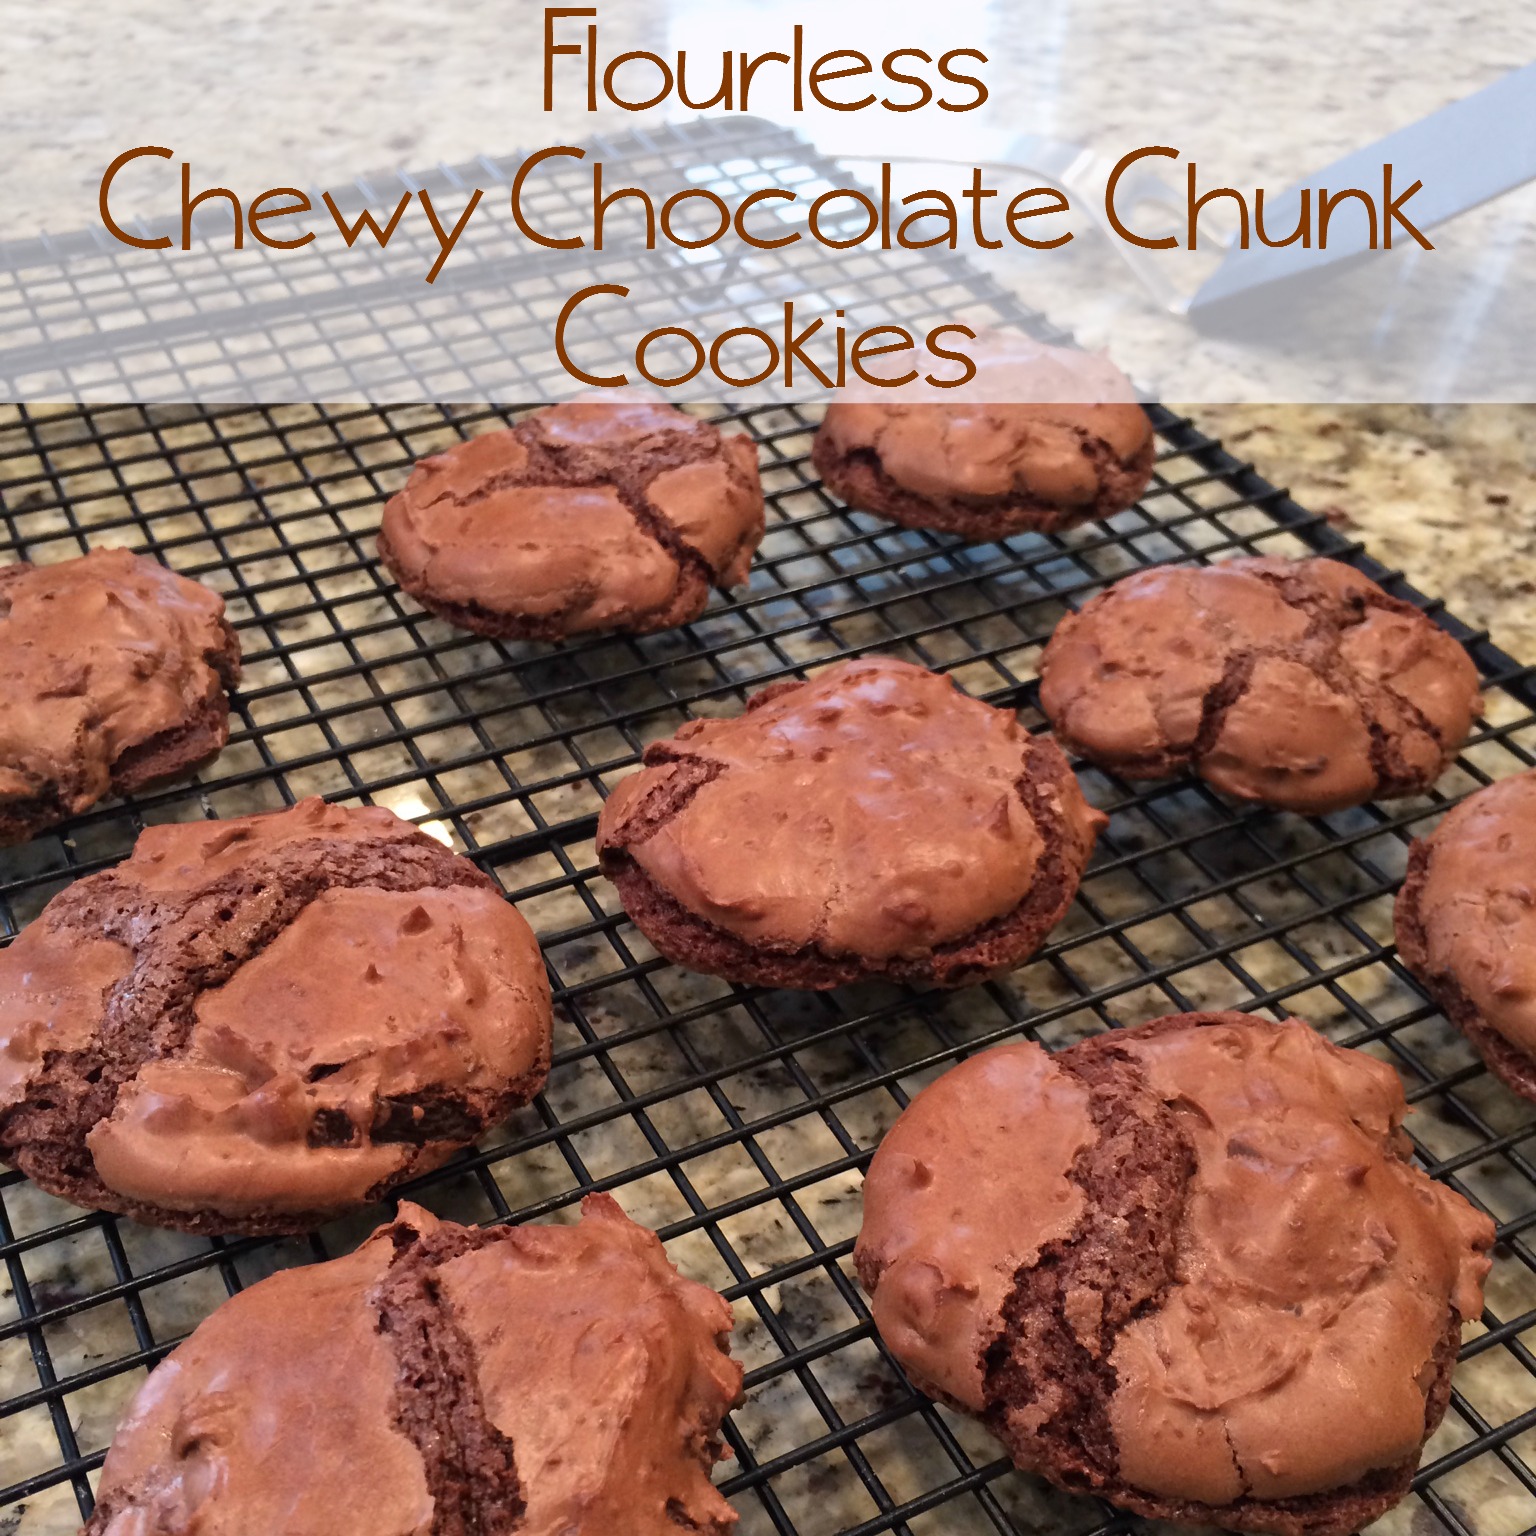 Flourless Gluten Free Chewy Chocolate Chunk Cookies recipe From the Family With Love 12 Days of Baking Day 5